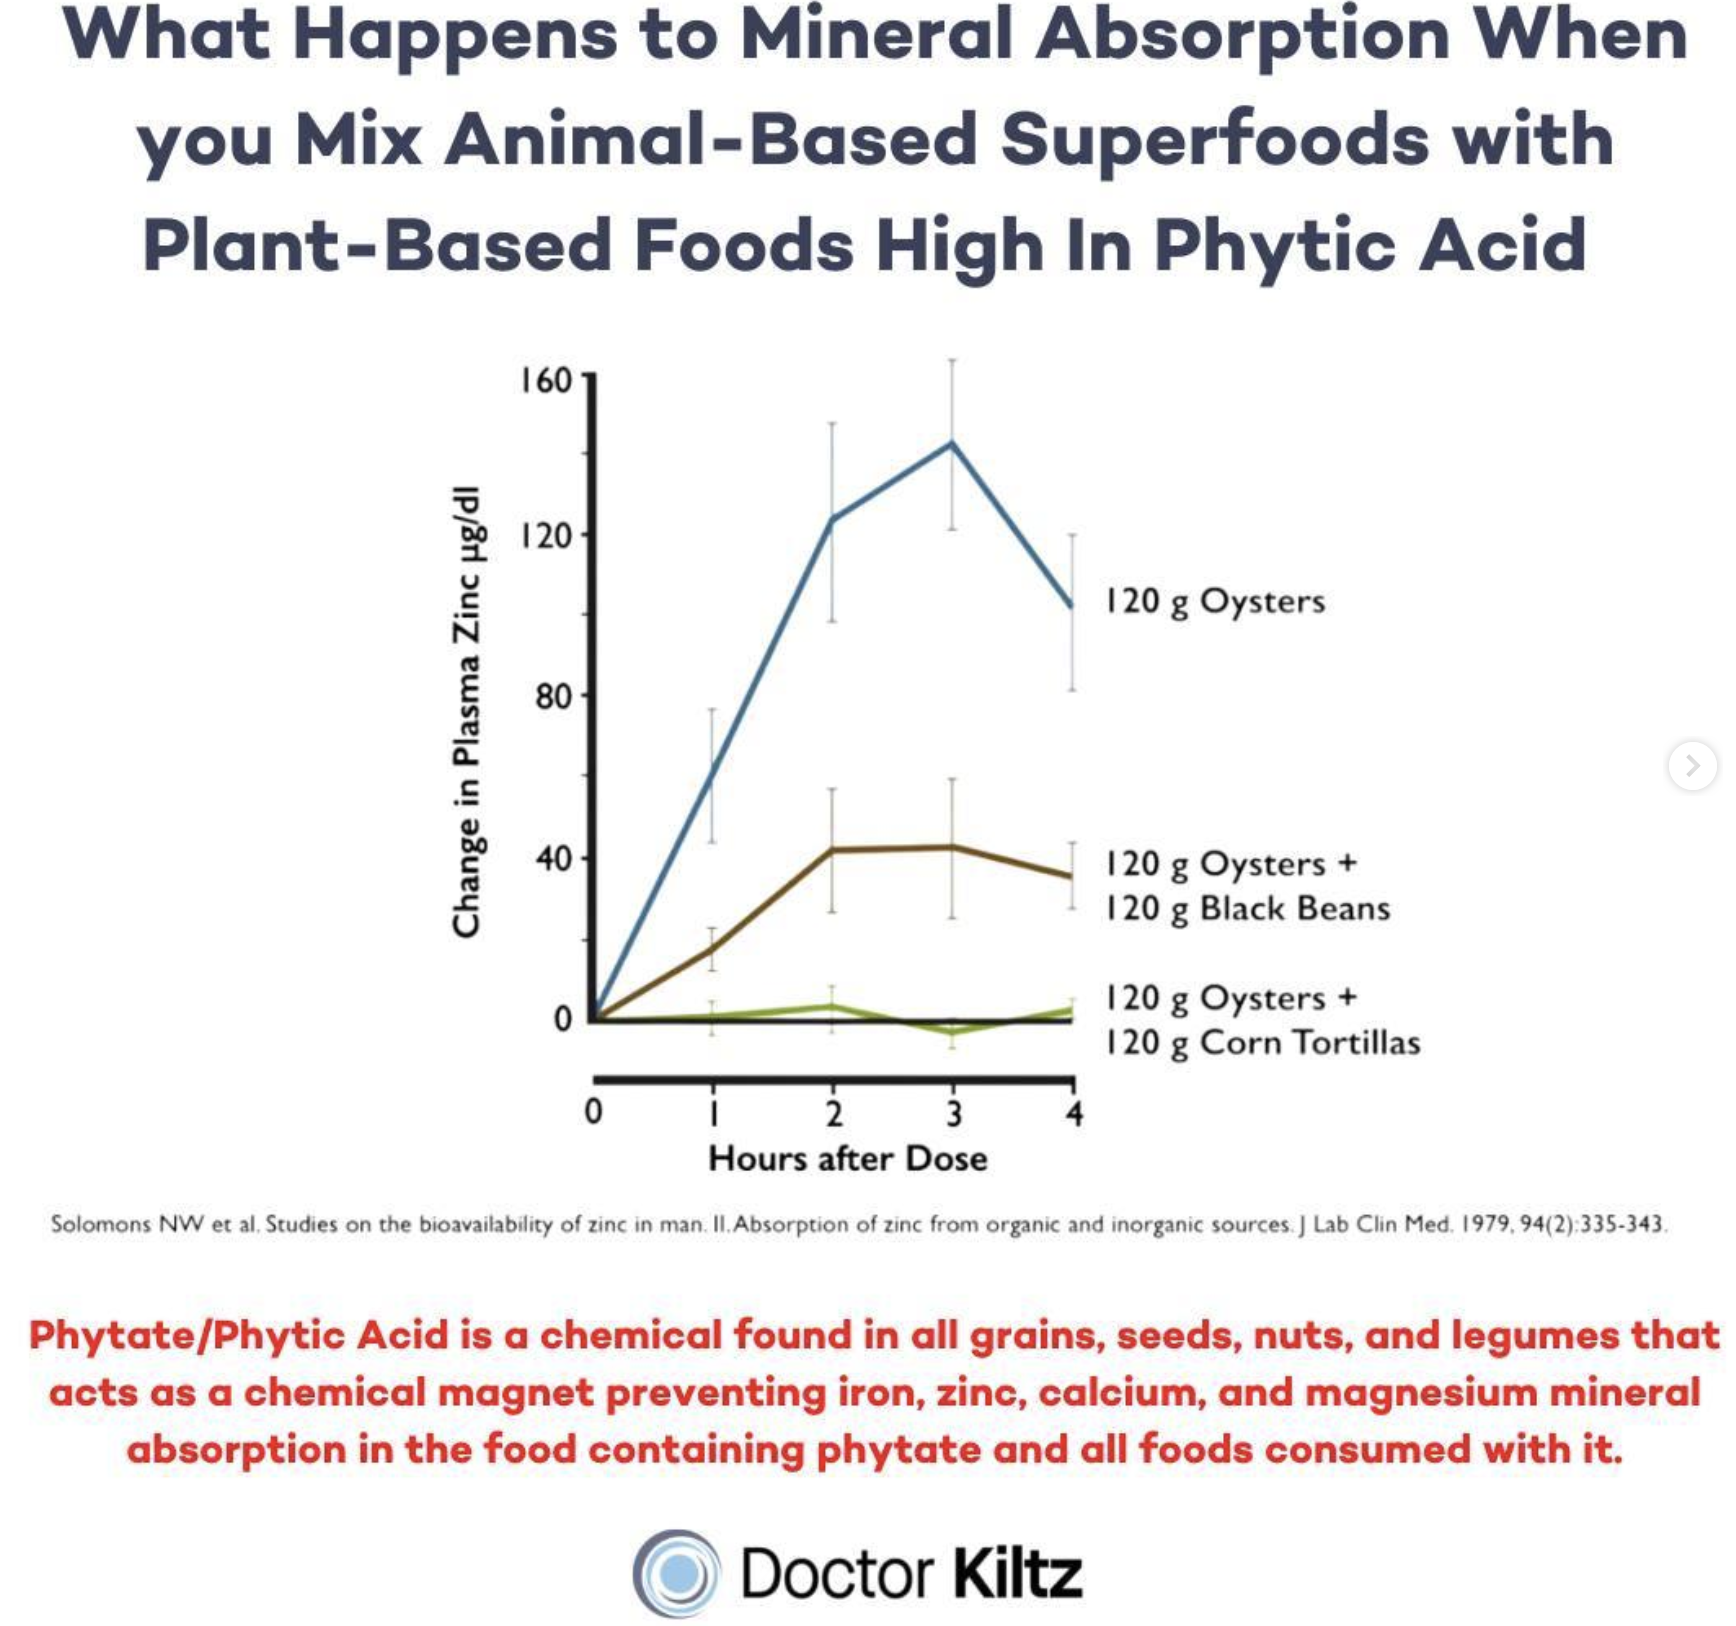 Phytic Acid Reduced Absorption of Zinc